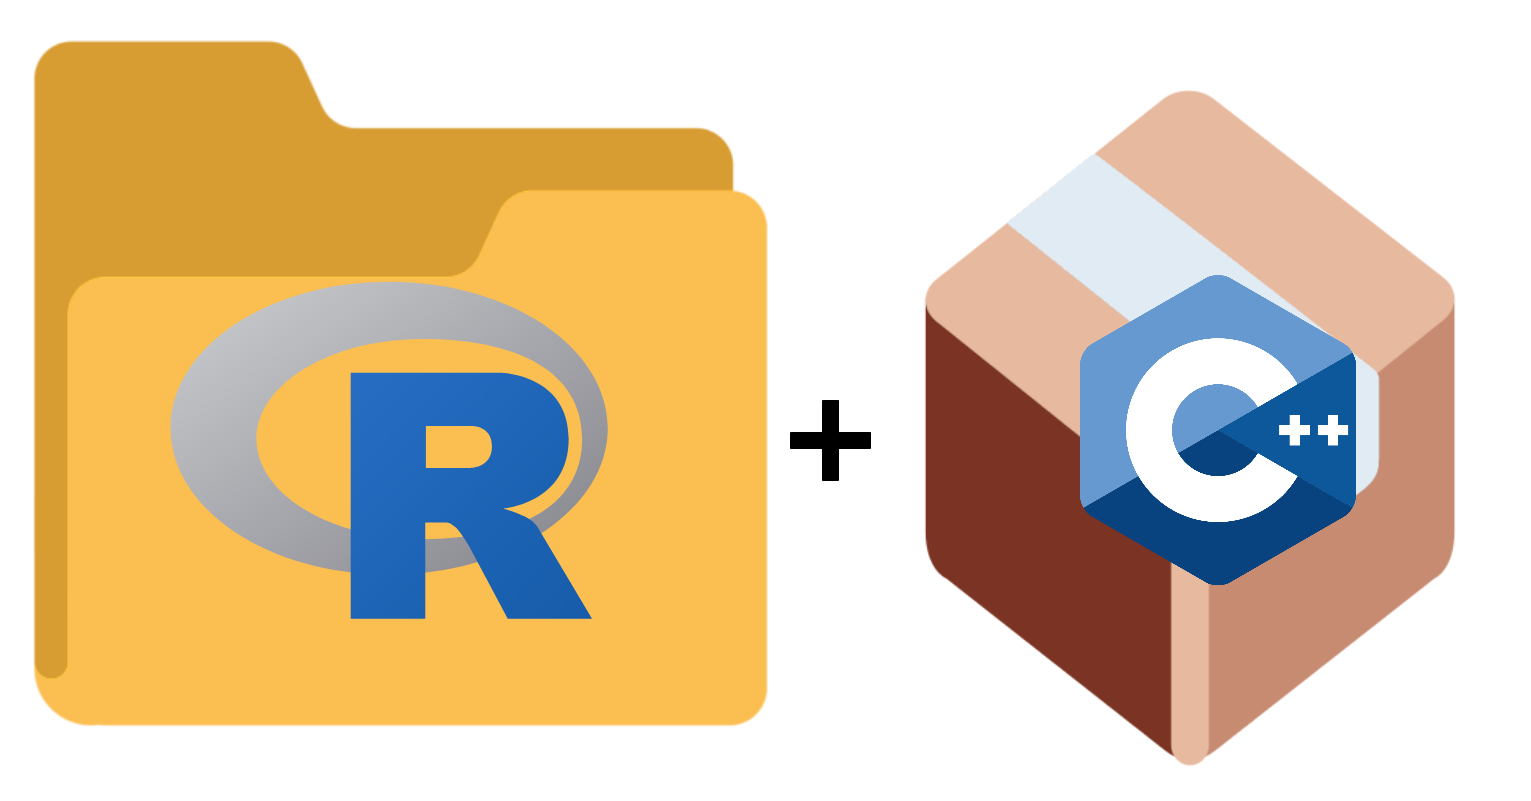 Graphic showing R logo in folder icon, then a plus sign, then C++ logo inside the package icon